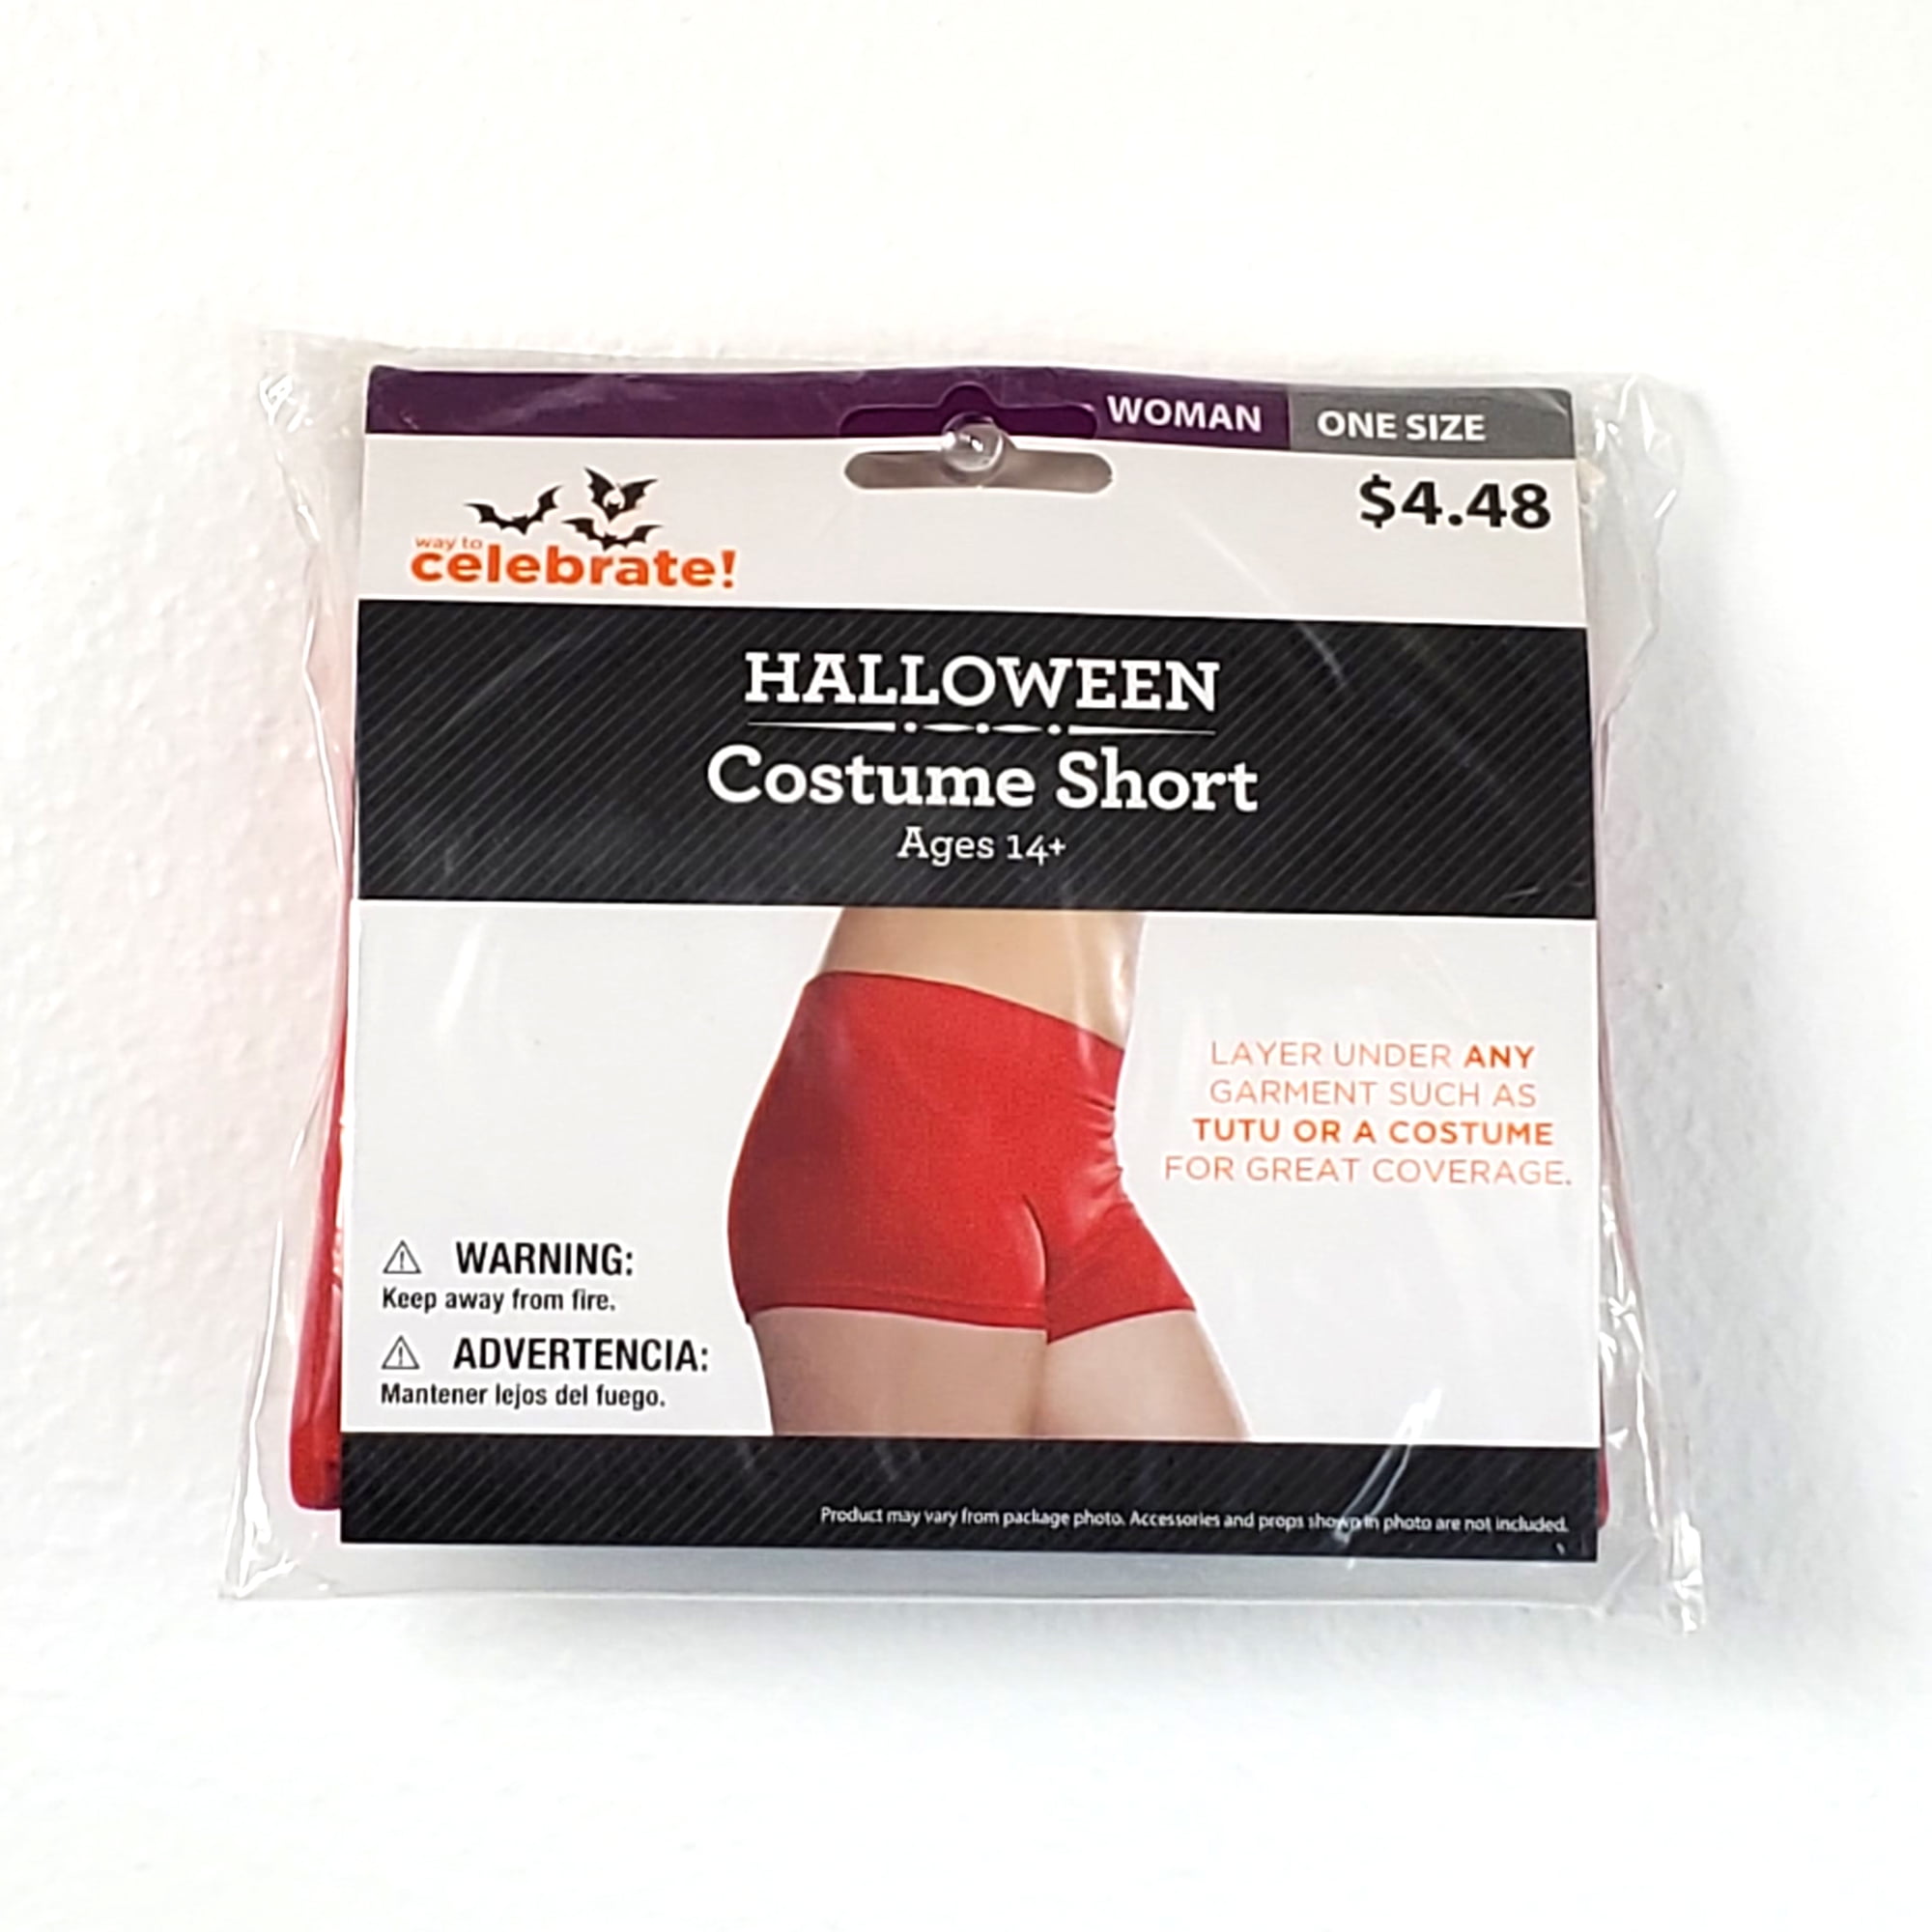 NEW WOMEN'S ADULT Red COSTUME SHORTS Halloween Costume ONE SIZE